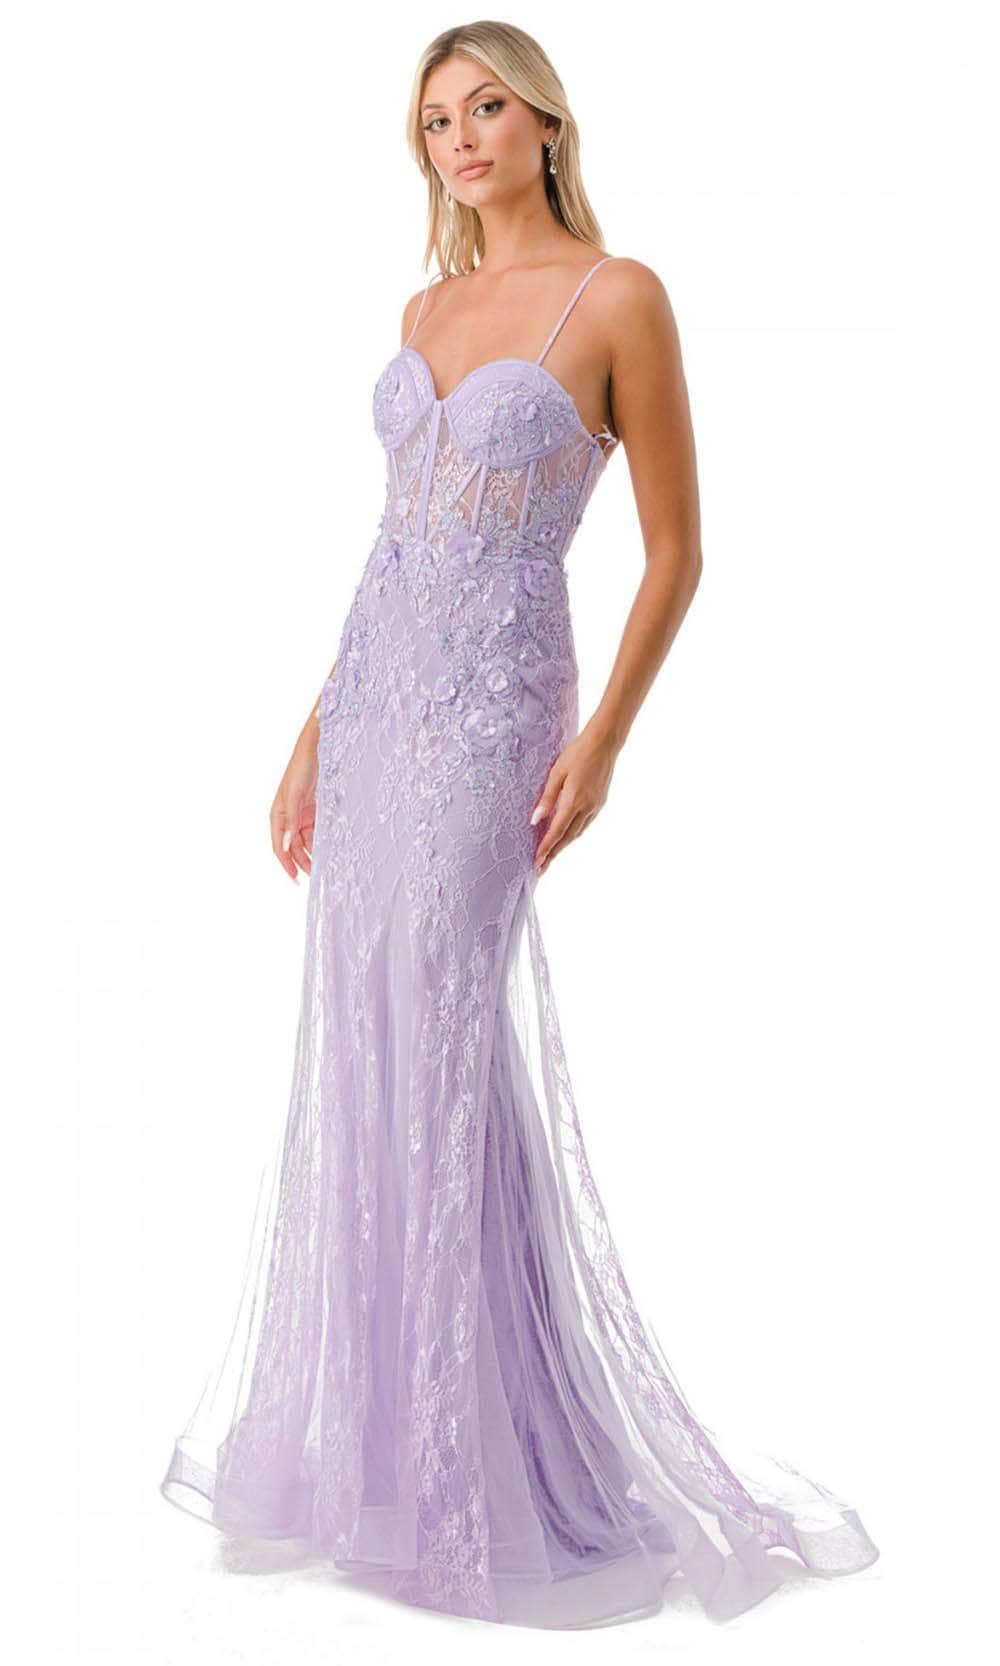 Aspeed Design P2120 - Bustier Bodice Prom Gown